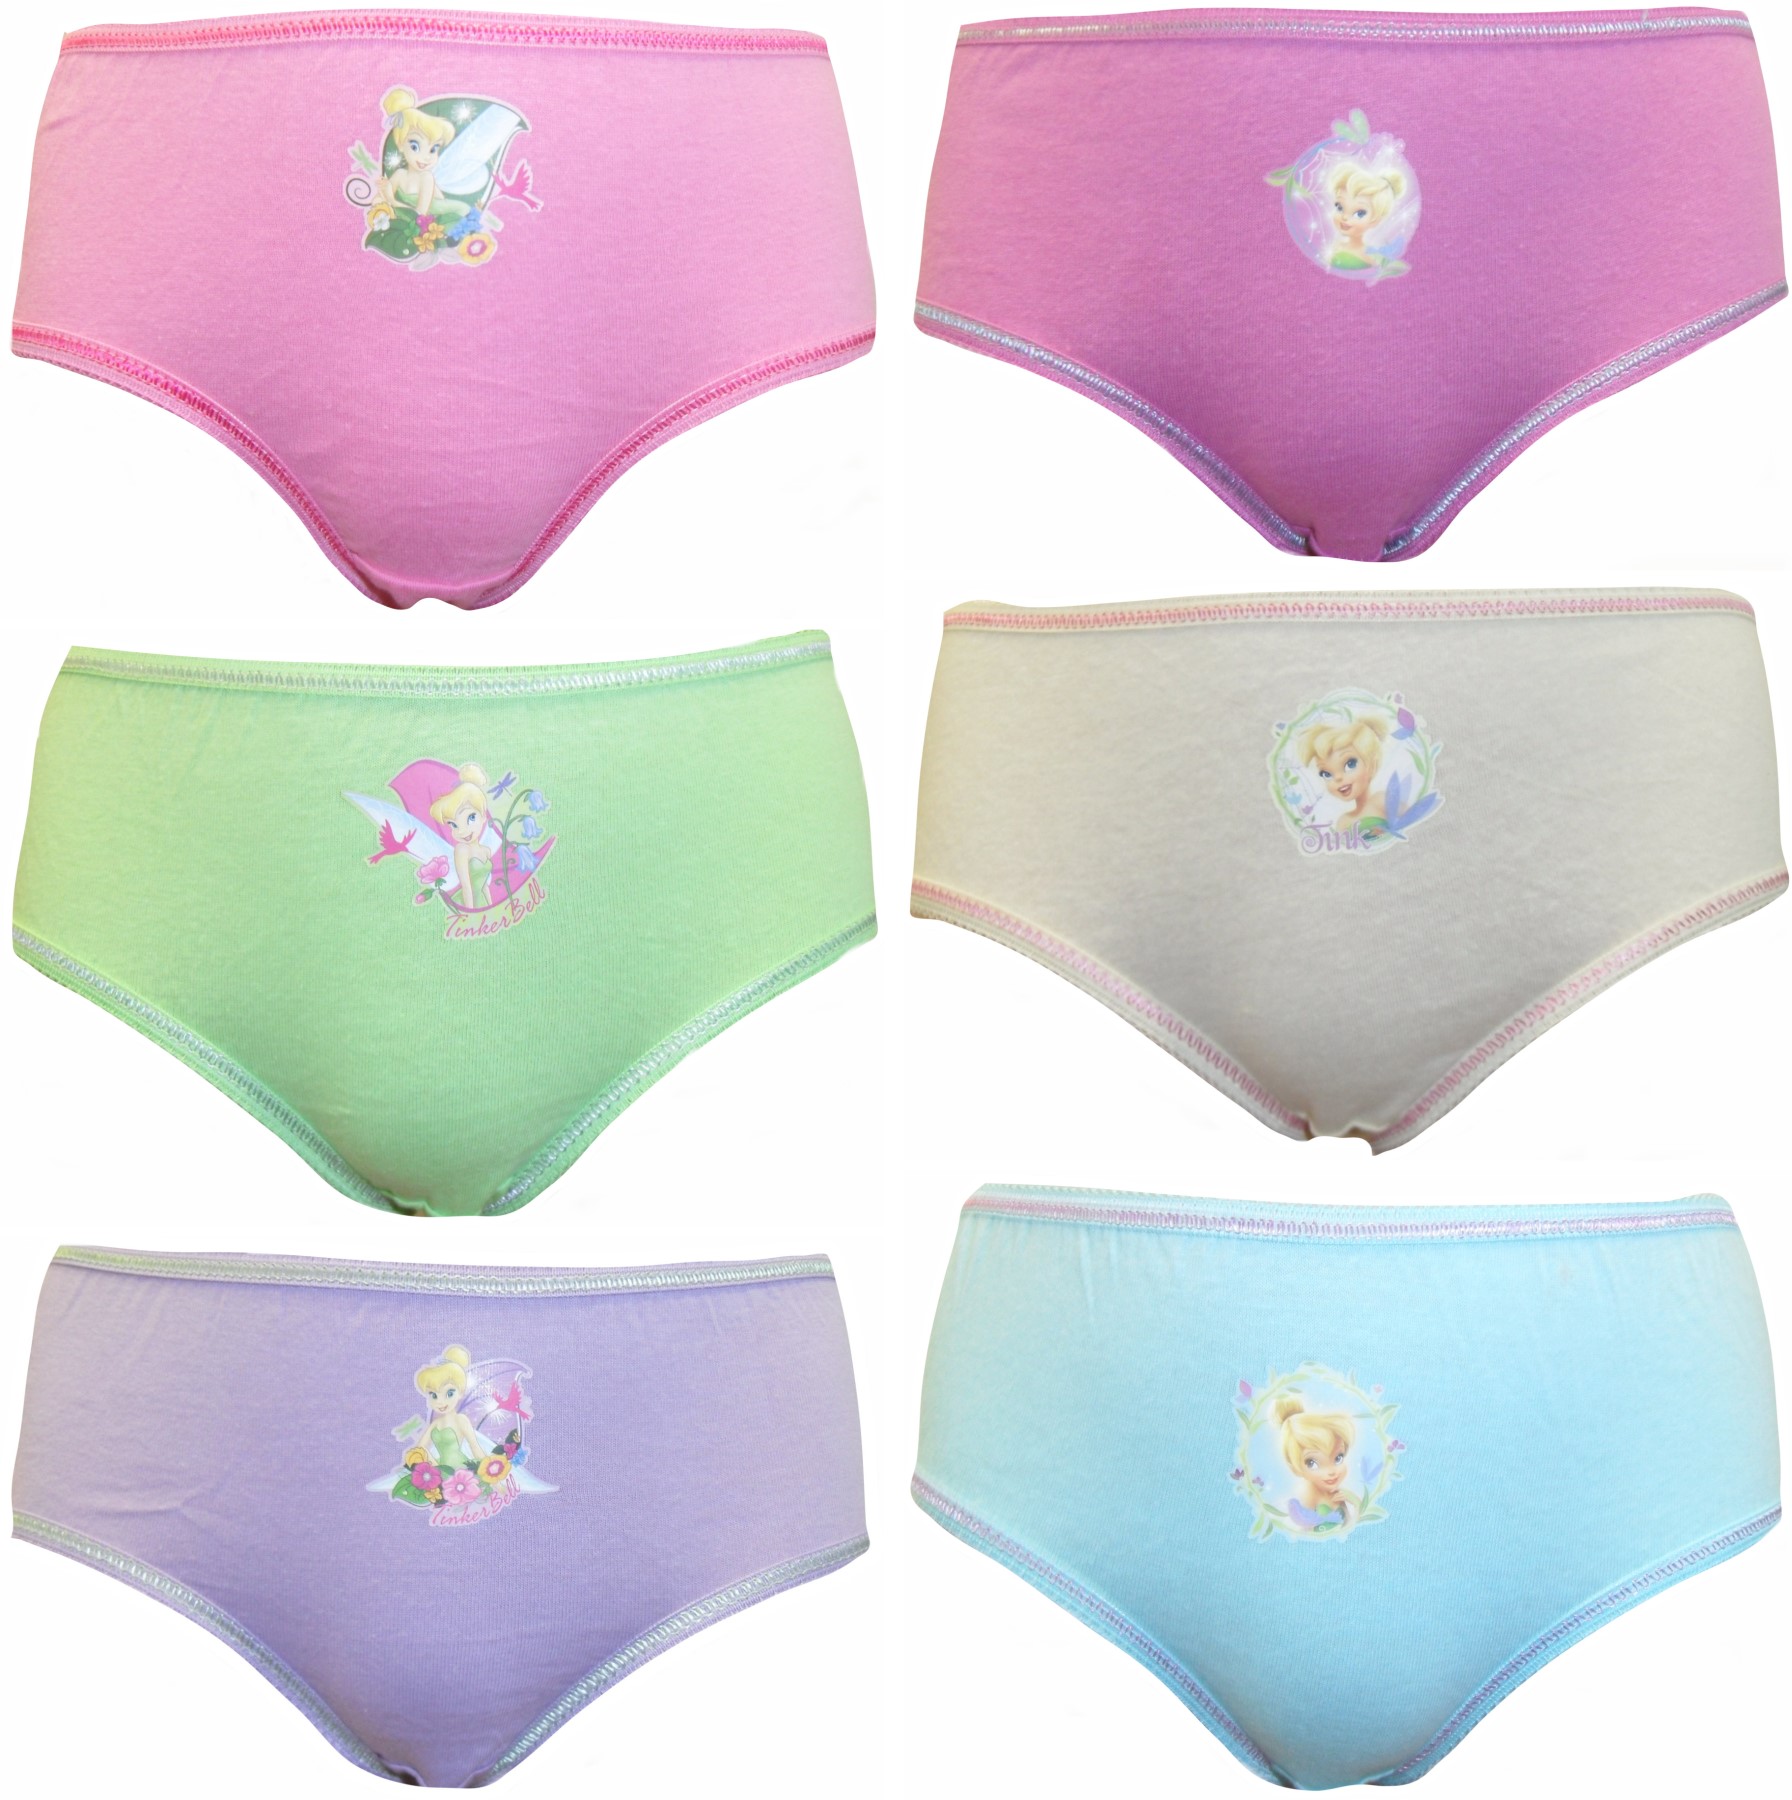 Tinkerbell Briefs GUW19 a.JPG  by Thingimijigs